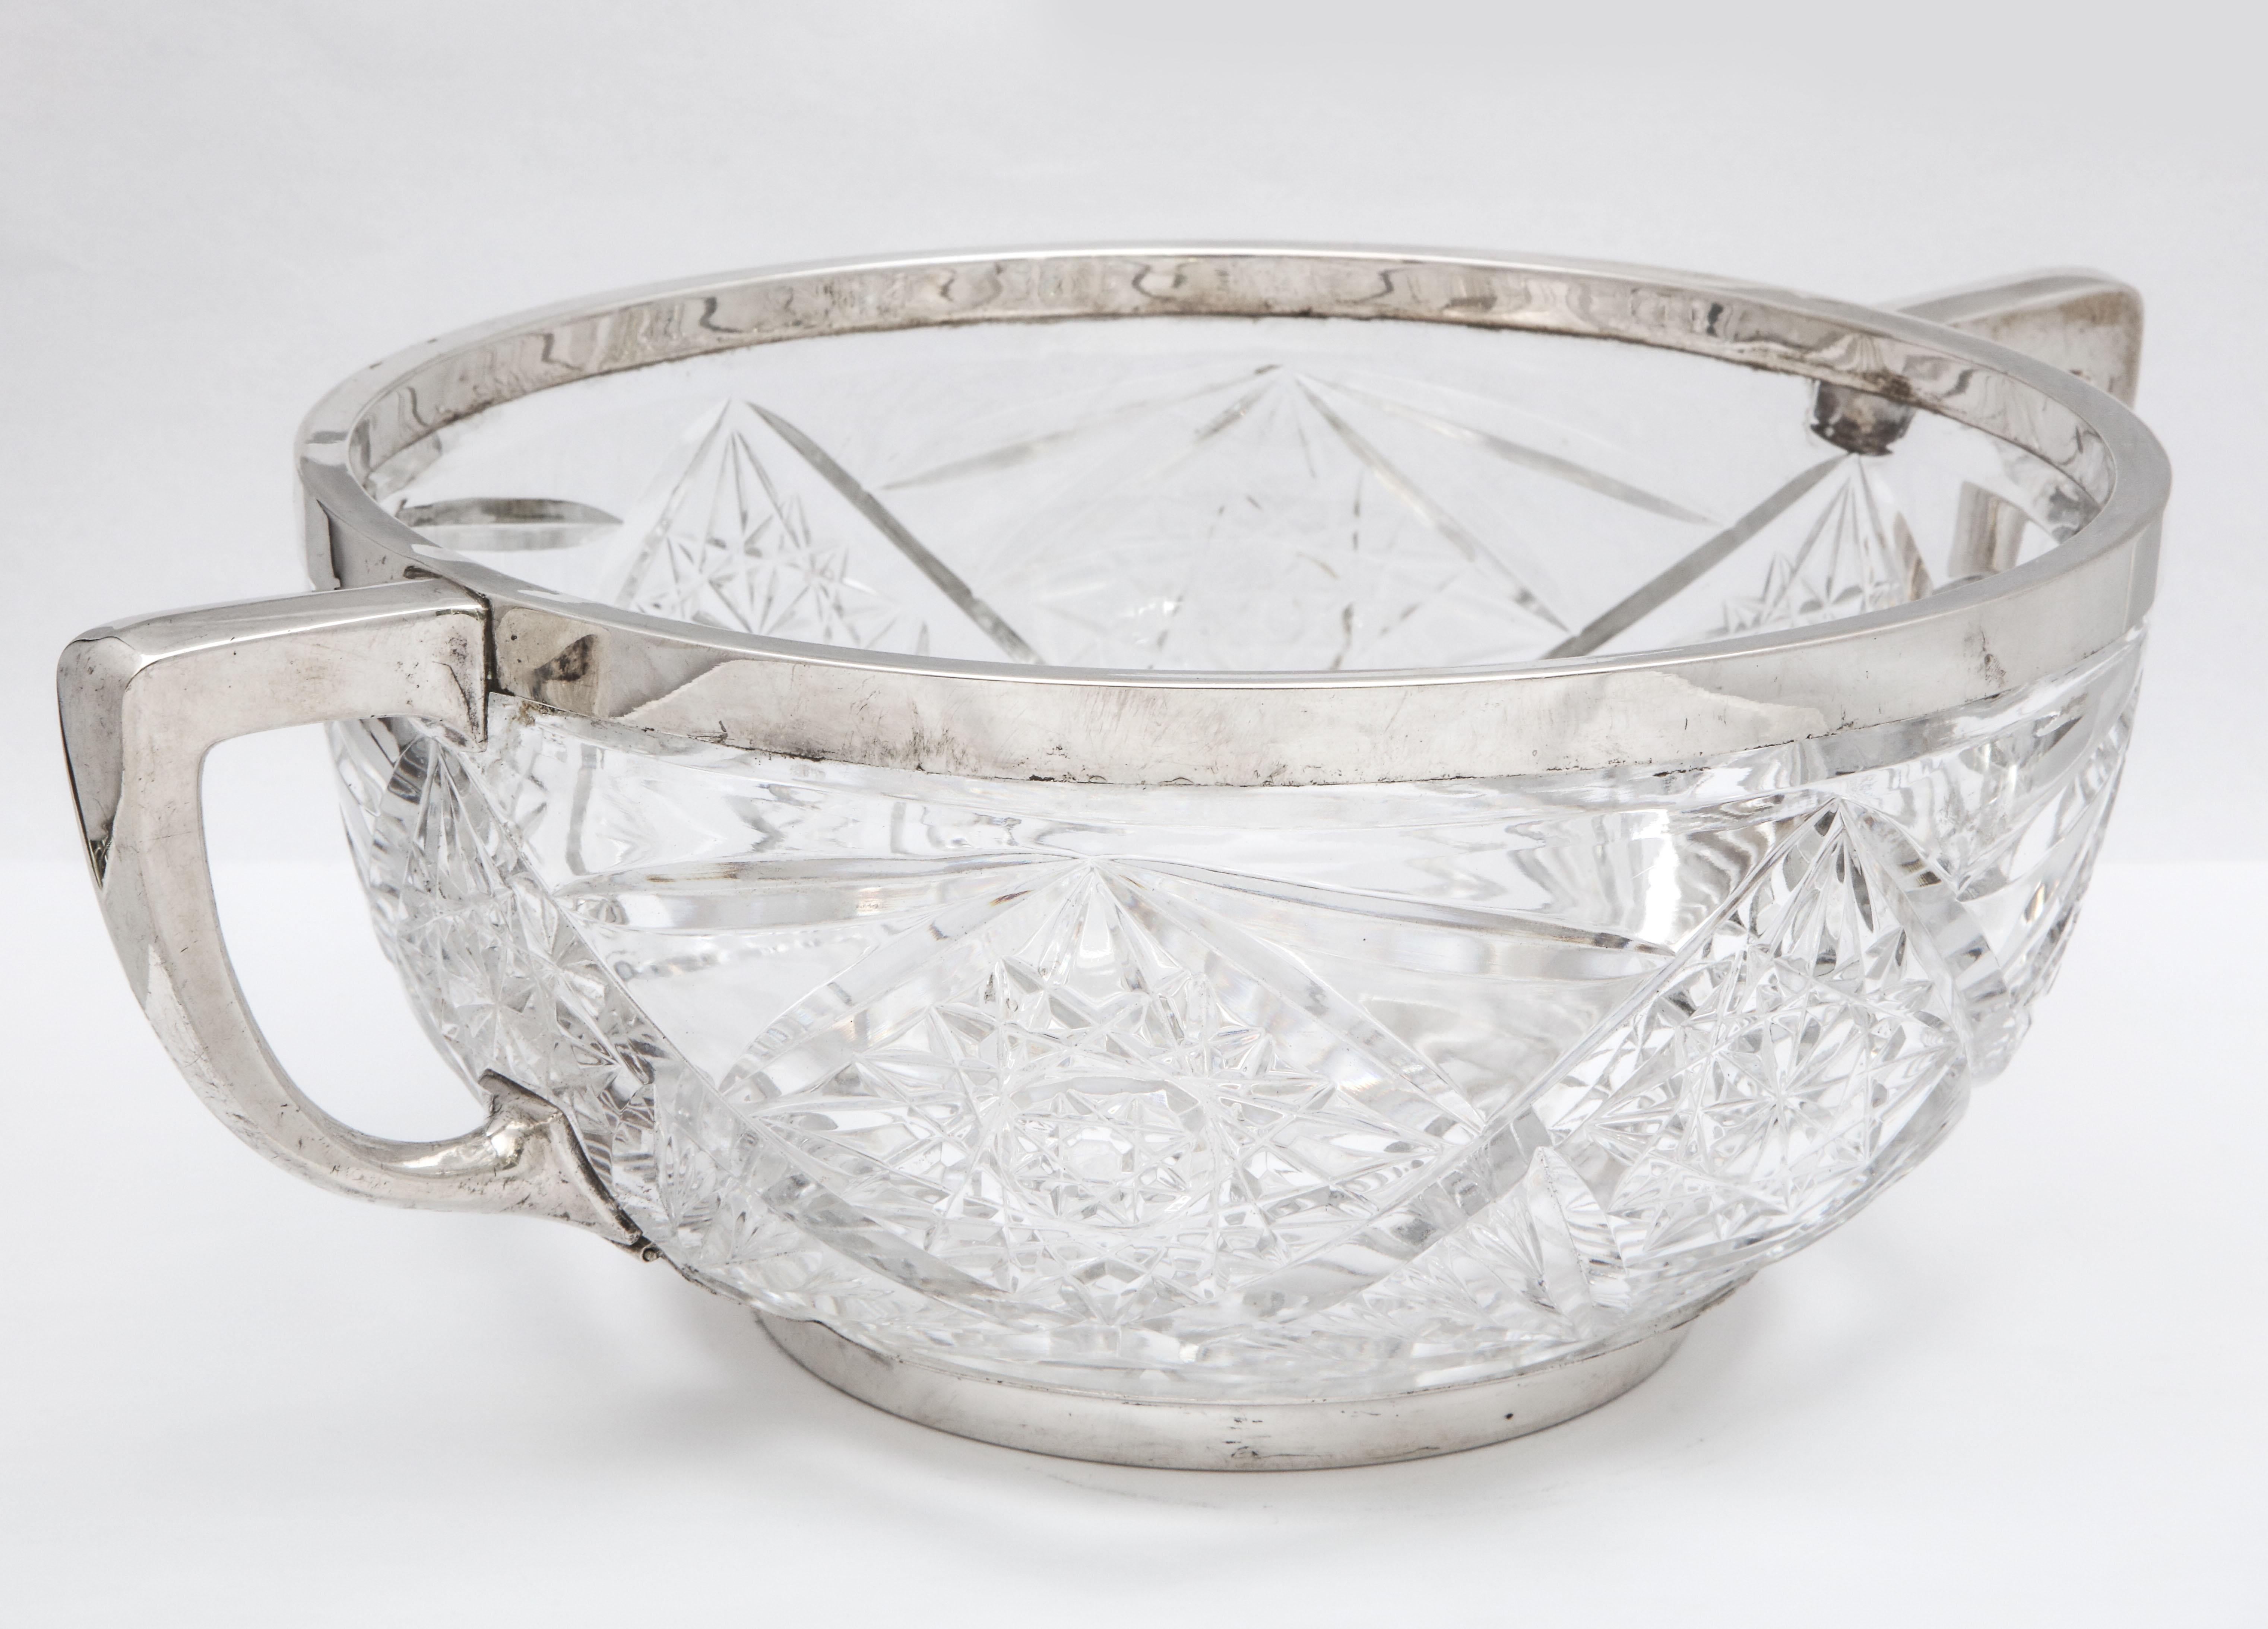 Edwardian period, Continental silver-mounted centerpiece bowl, Germany, circa 1910, Deyhle Gebruder-Schwabish Gmund - maker. Silver mount is removable. Measures 14 inches wide (handle to handle) x 10 inches diameter x 5 inches high. Dark spots in